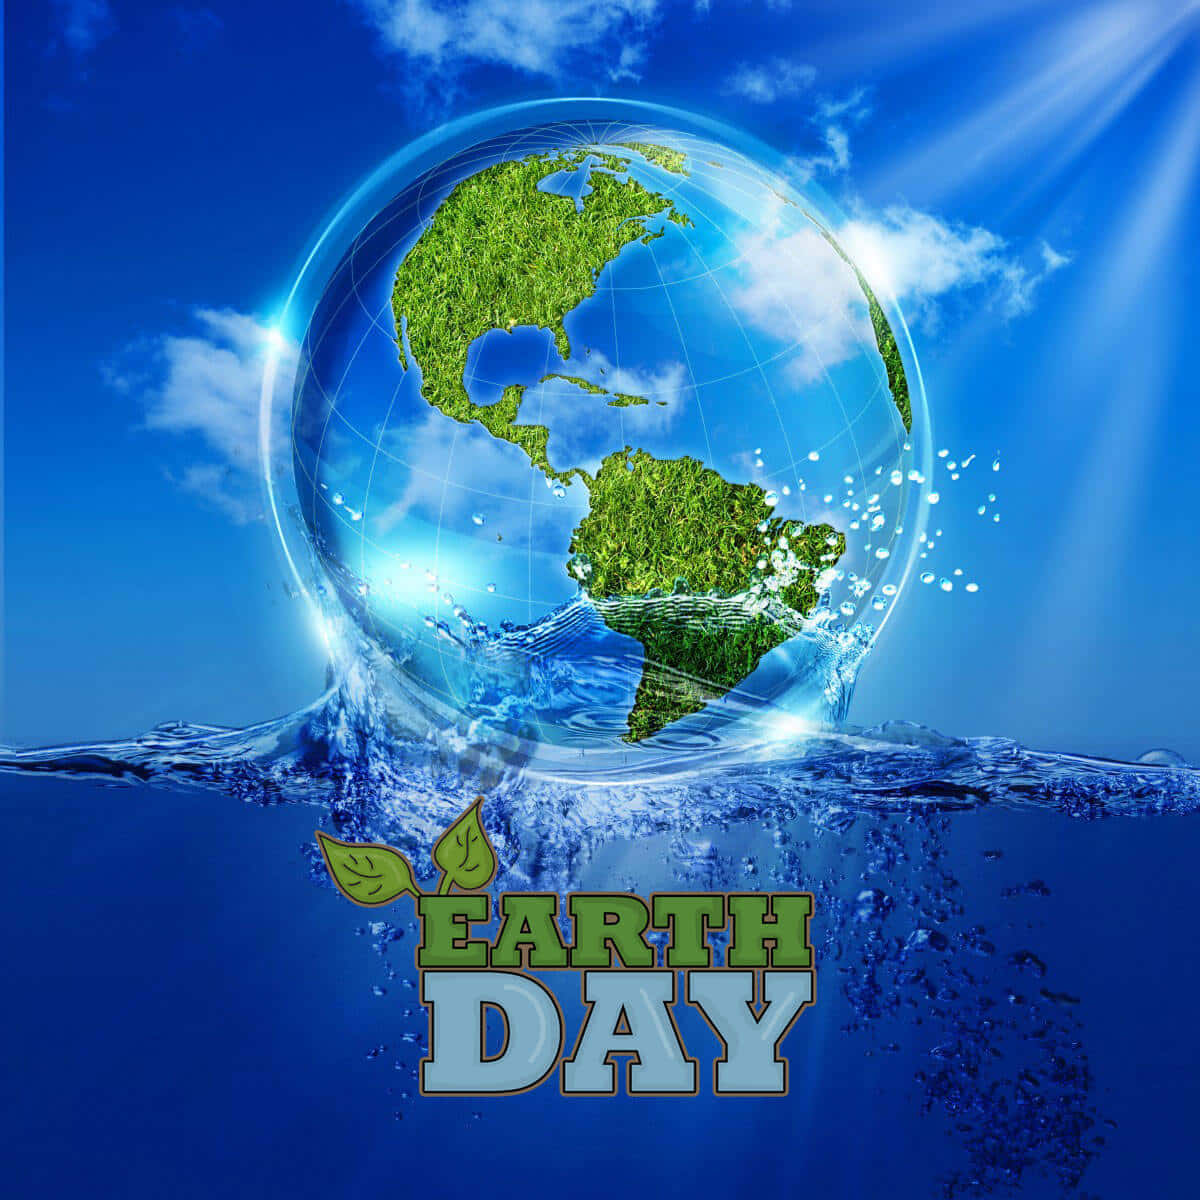 "Celebrate Earth Day and take care of the planet!"